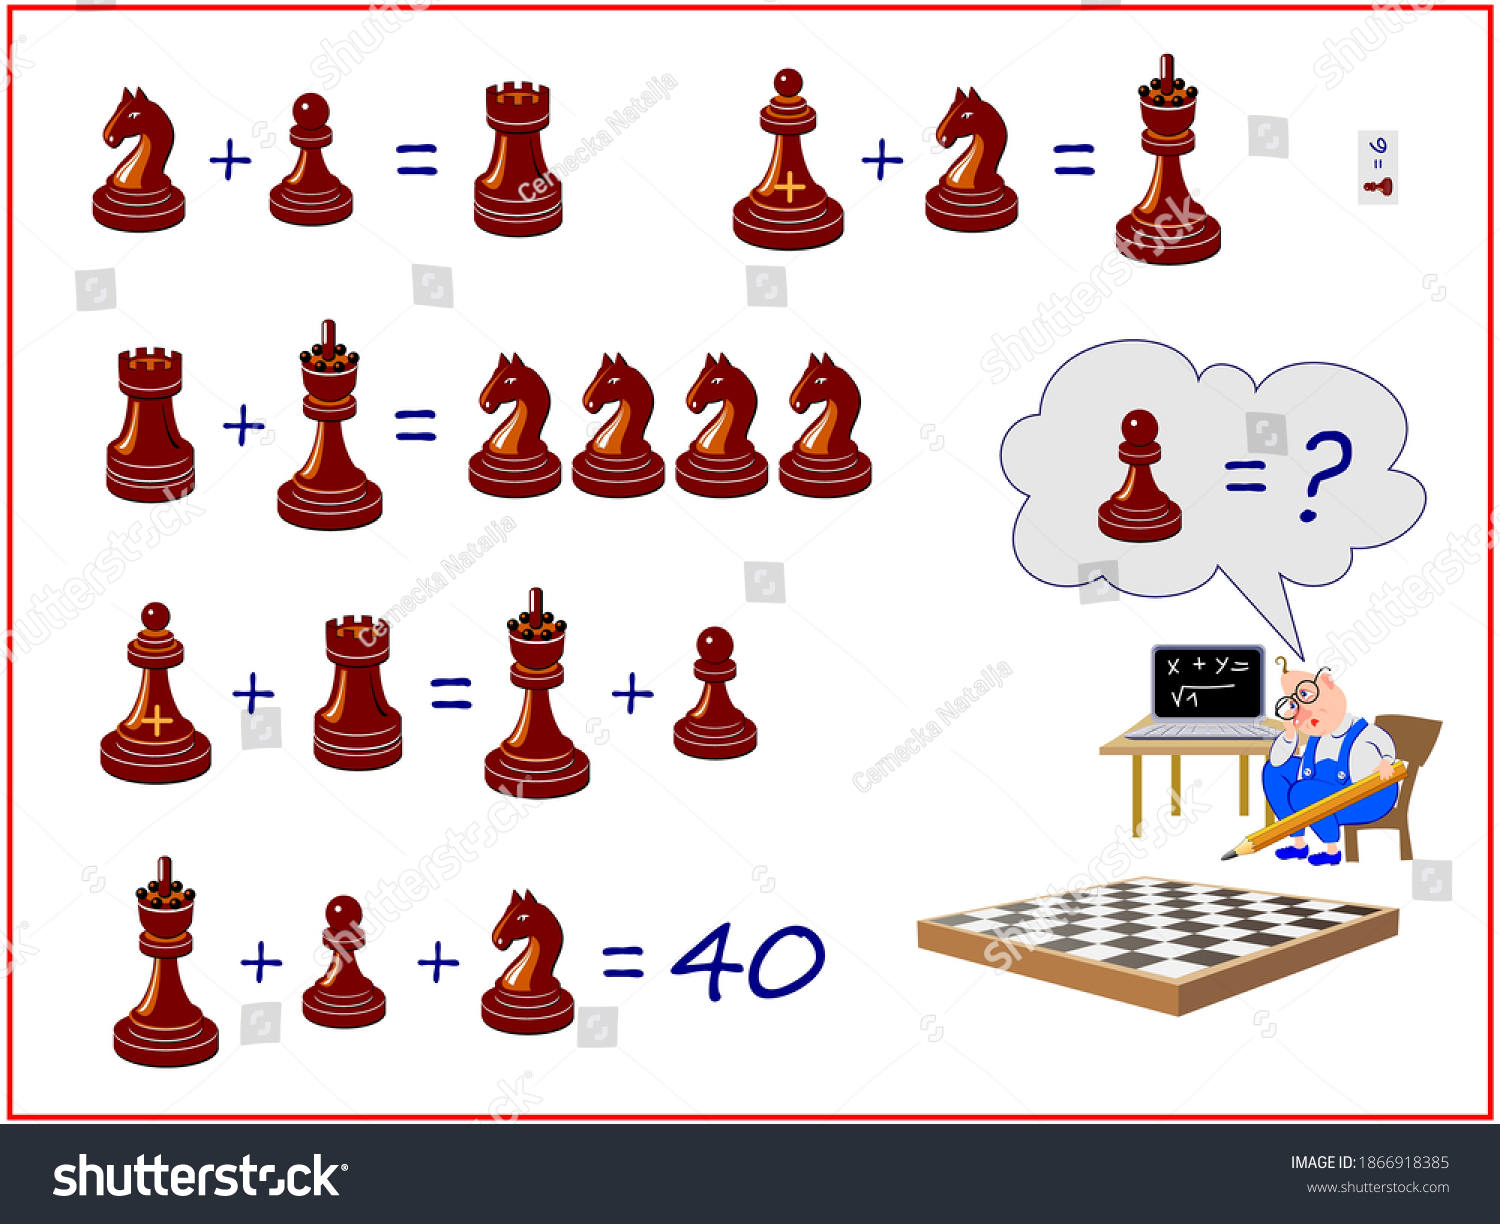 SVG of Mathematical logic puzzle game for smartest. How much is the pawn? Solve examples and count the price of all chess pieces. Page for brain teaser book. Memory training exercises for seniors. svg